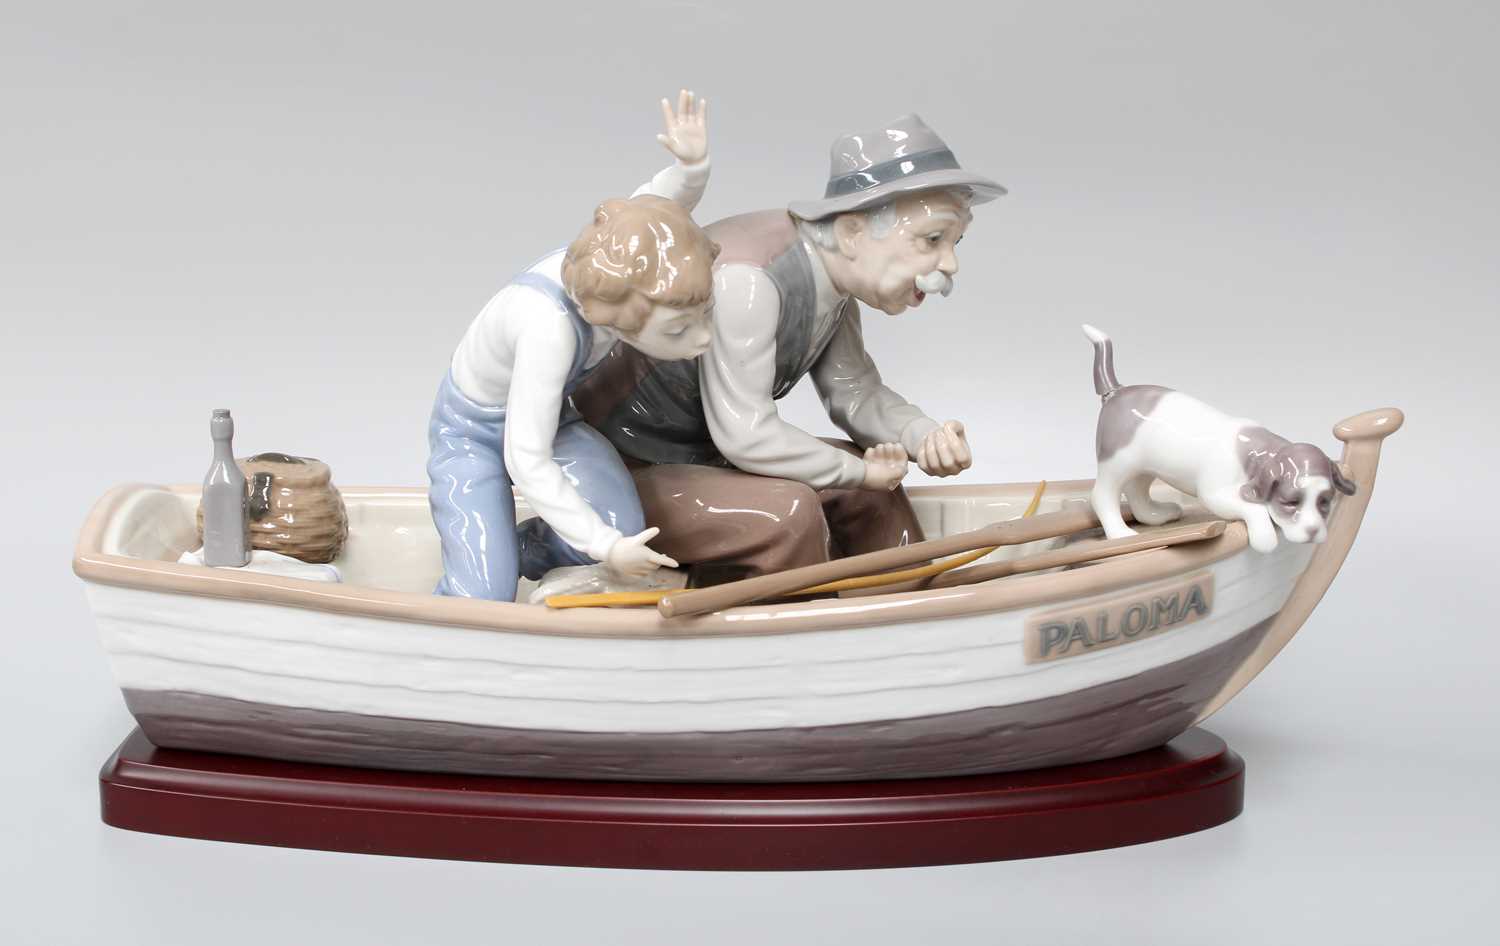 A Large Lladro Figure "Paloma", as a man, boy and dog in a rowing boat, on a wood plinth, 40cm long